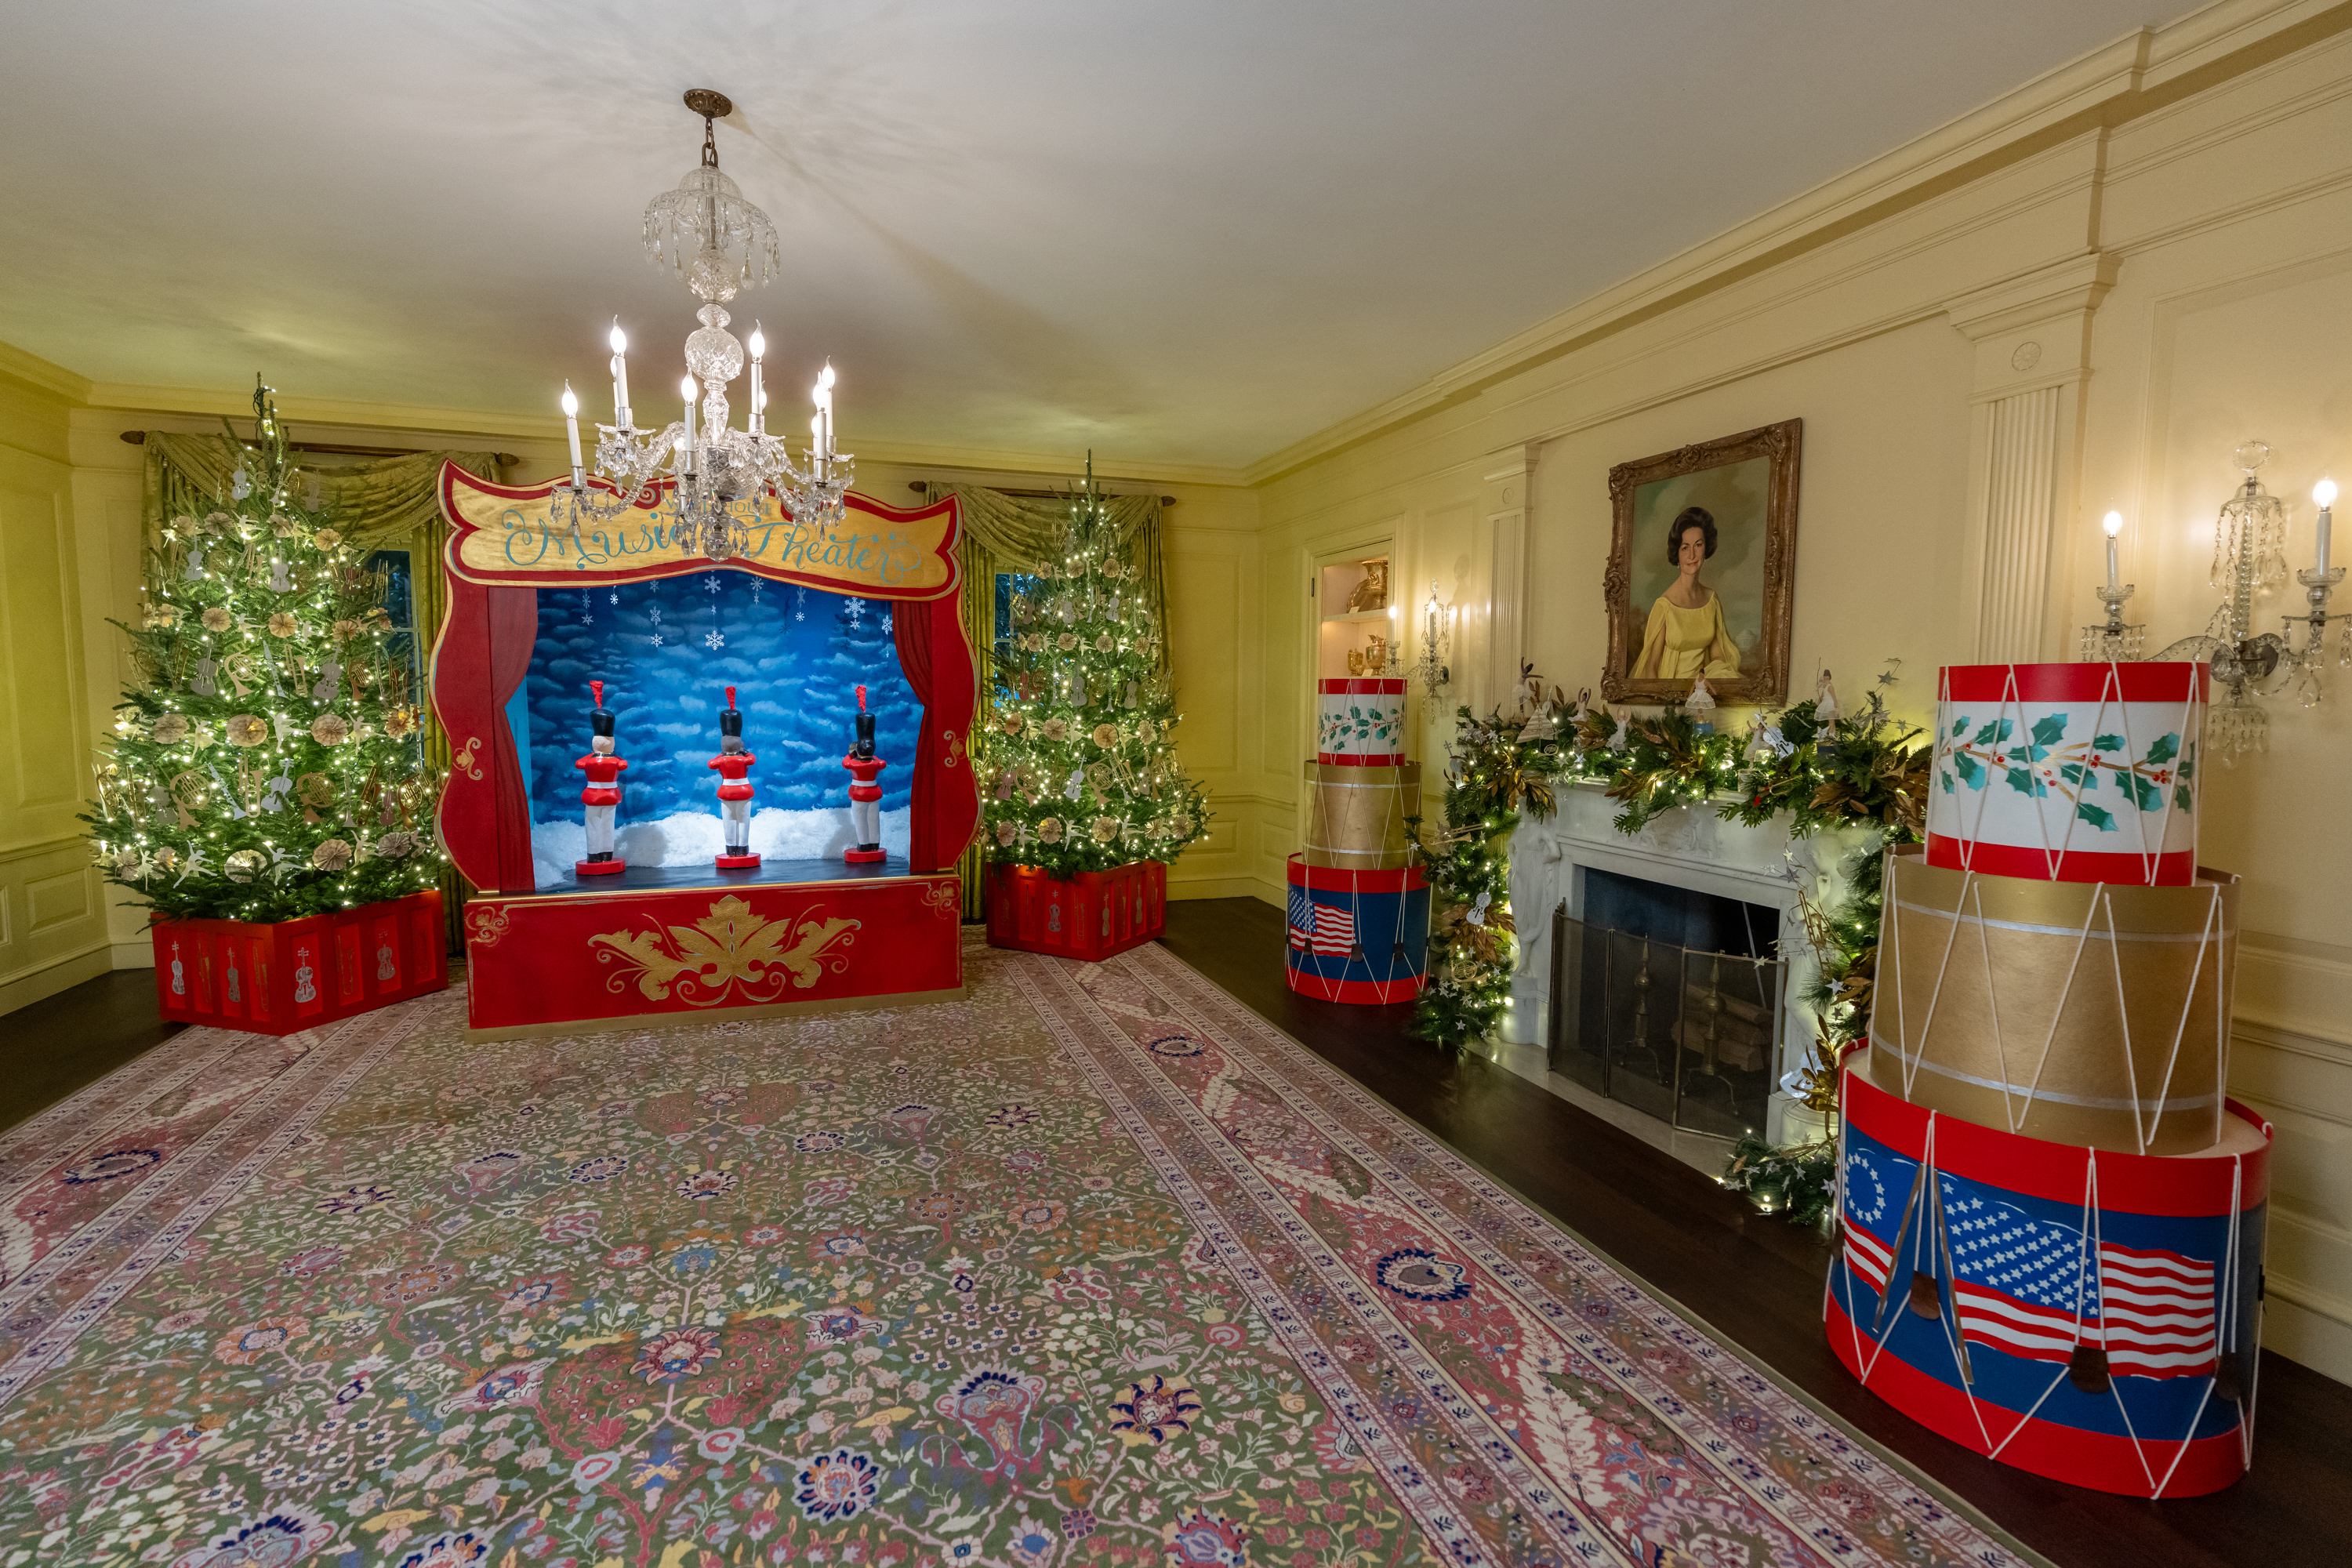 The Vermeil Room Christmas Decorations